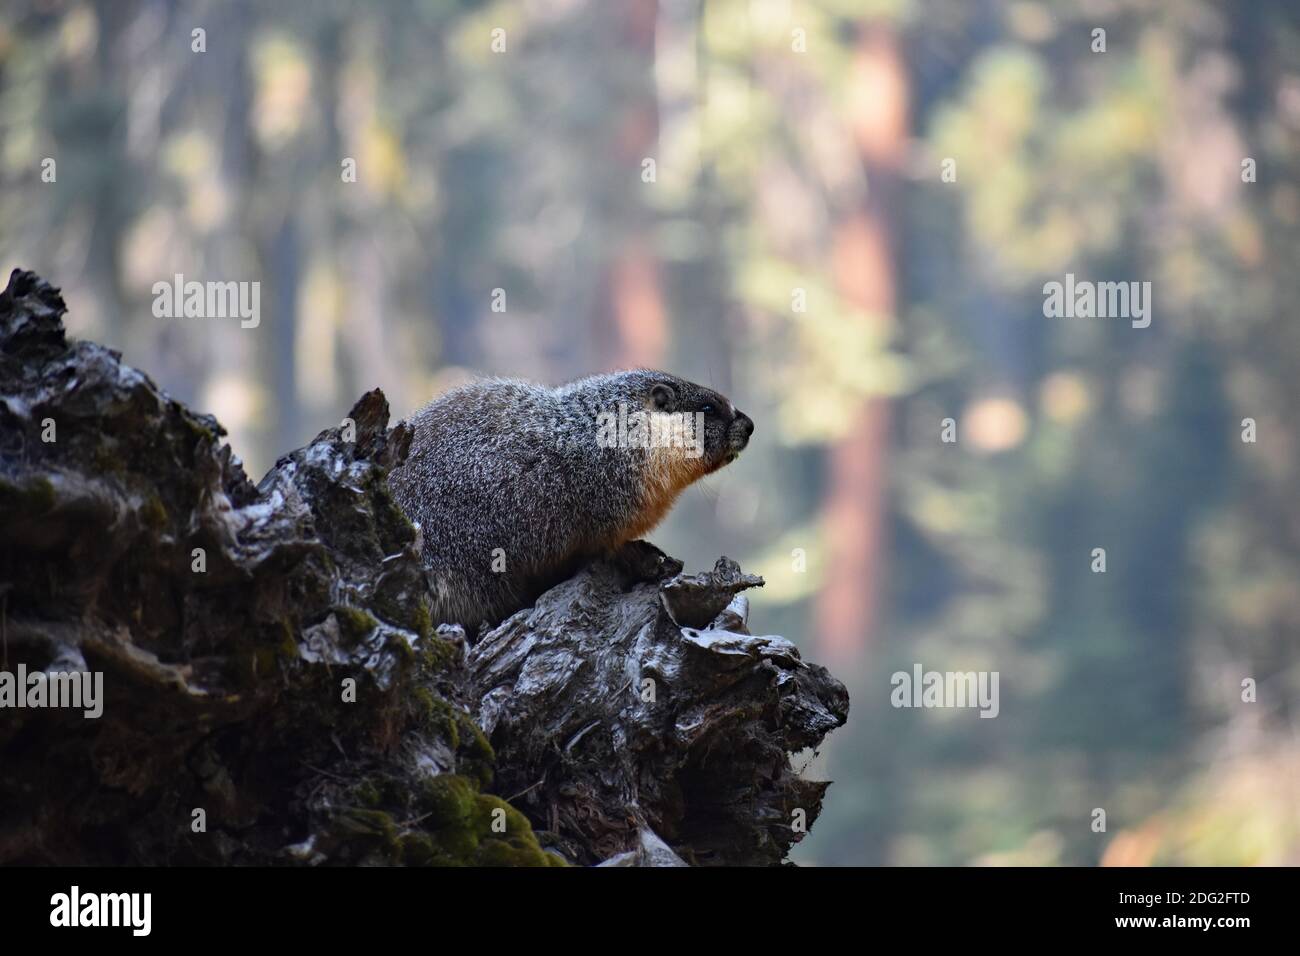 A Yellow Bellied Marmot (Marmota flaviventris) sits on the roots of a fallen Sequoia tree (Sequoiadendron giganteum) in Sequoia National Park, USA. Stock Photo